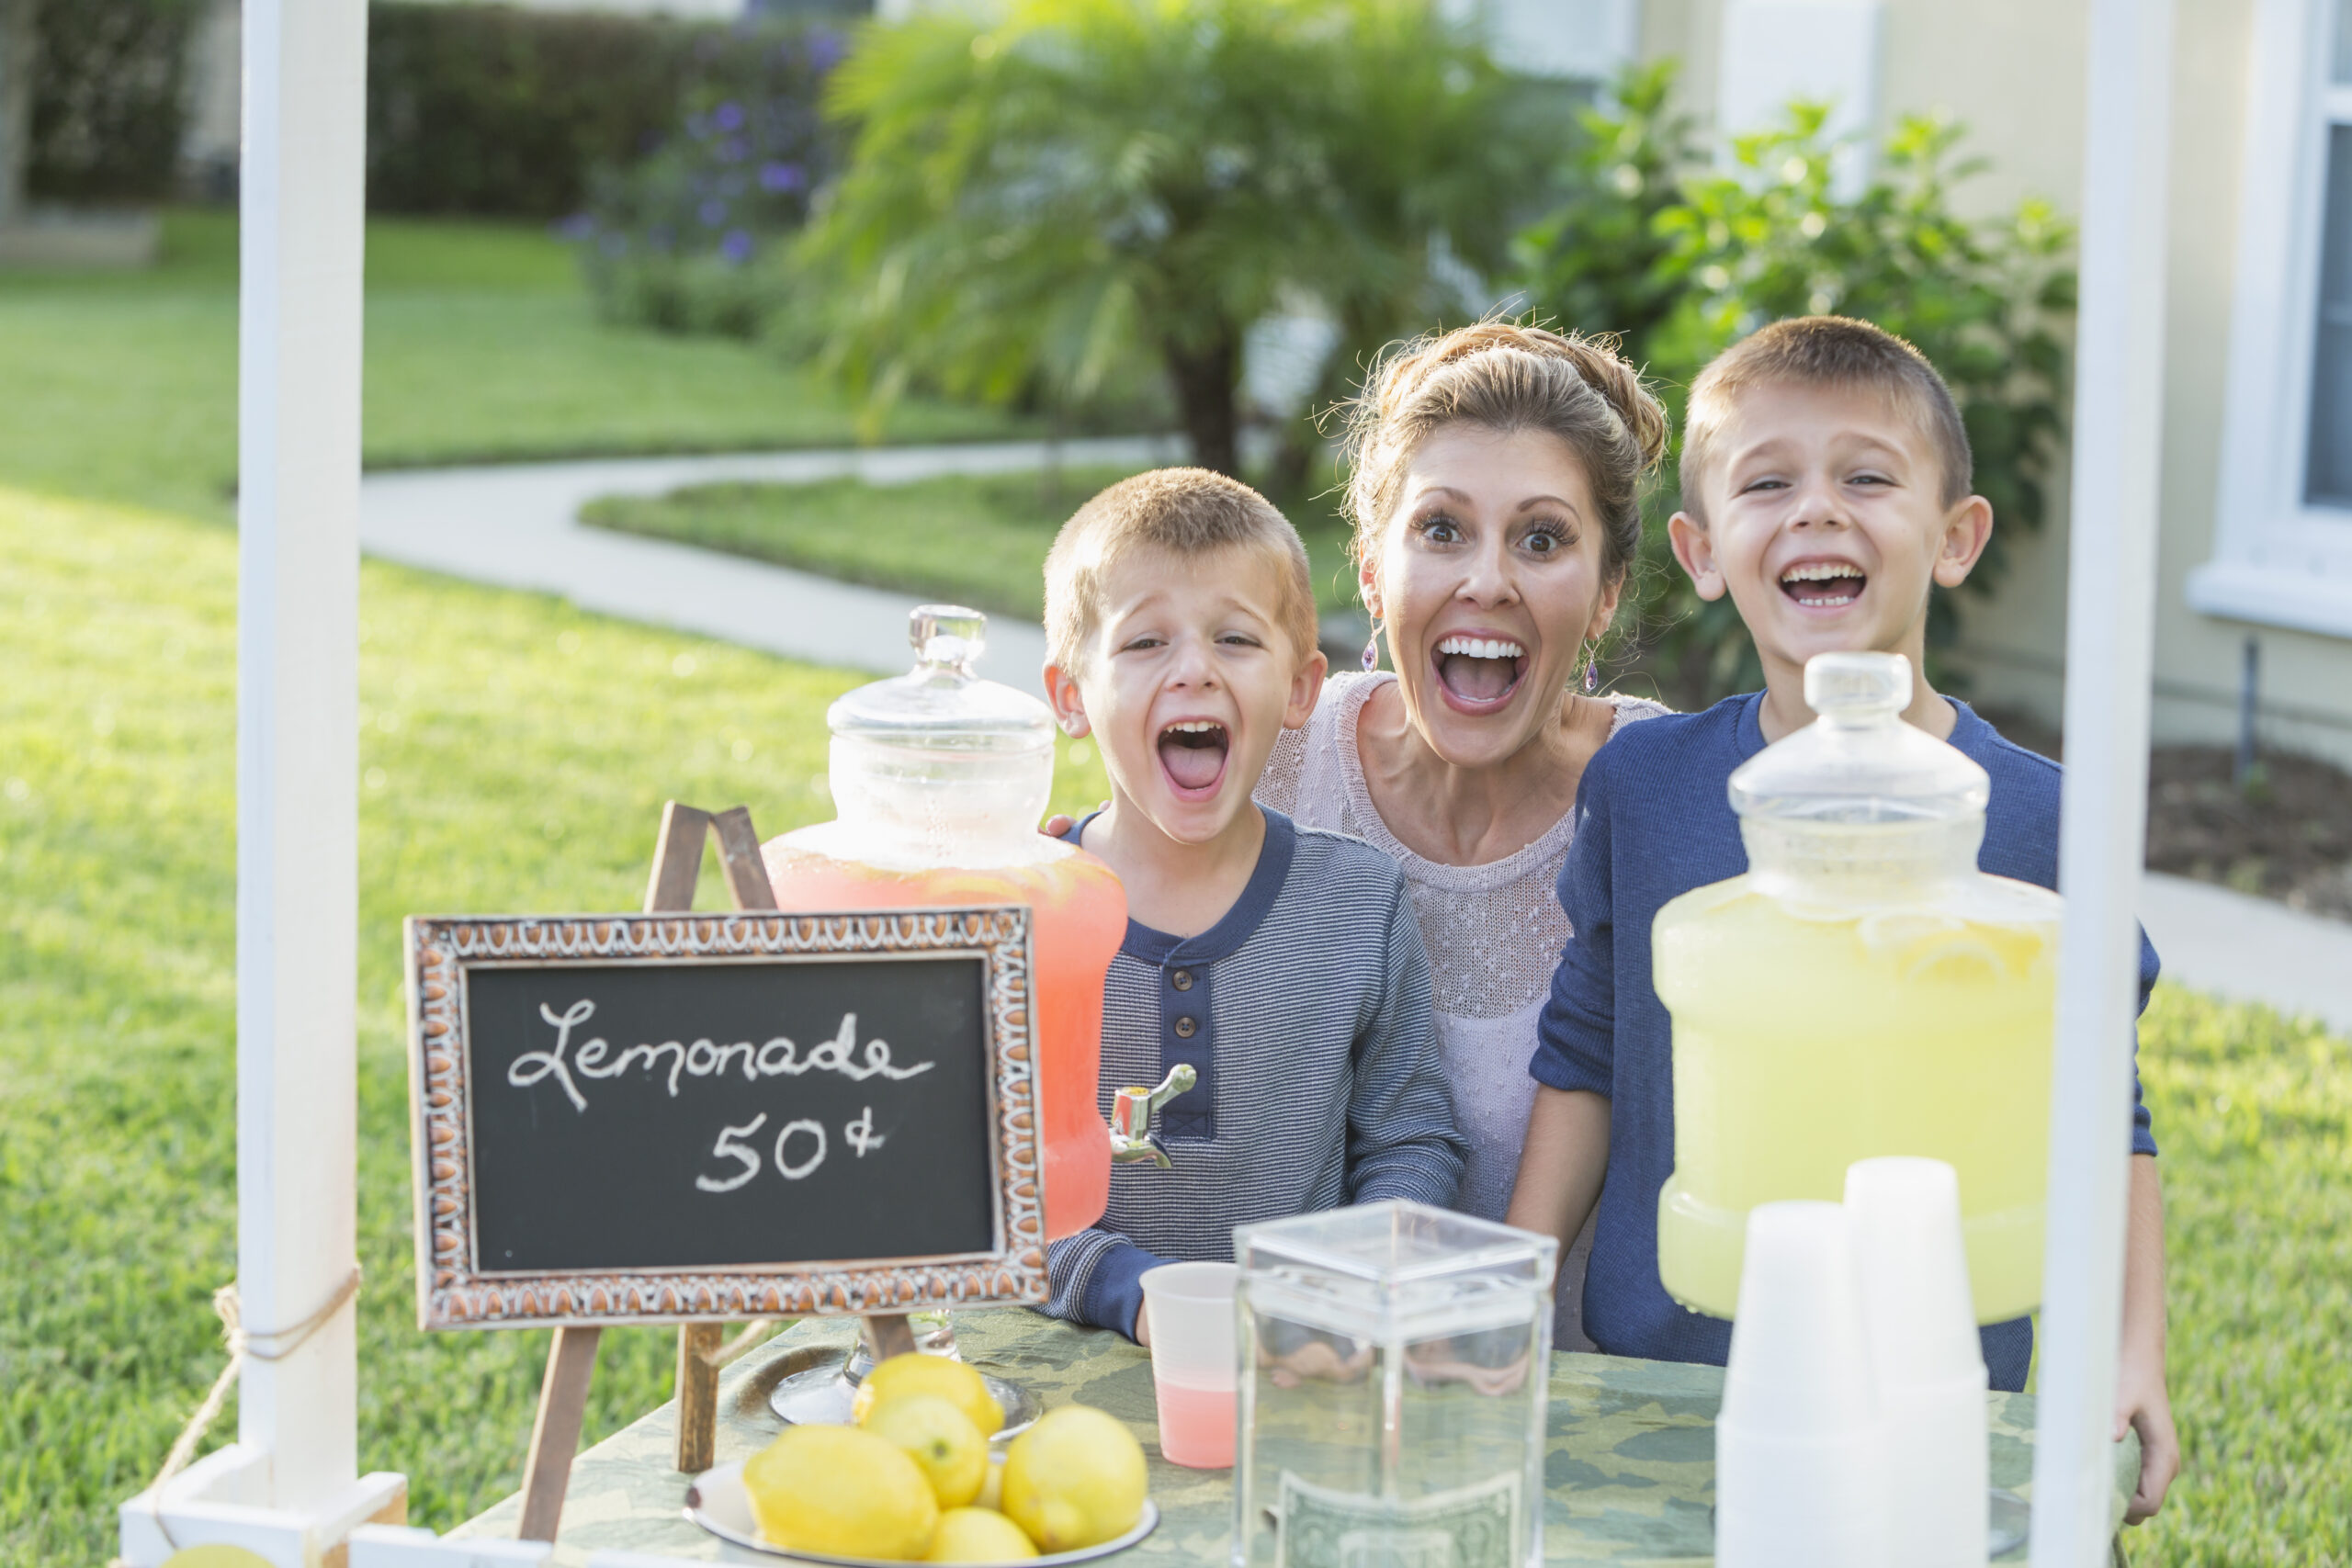 Financial wins. Mother and boys with lemonade stand.